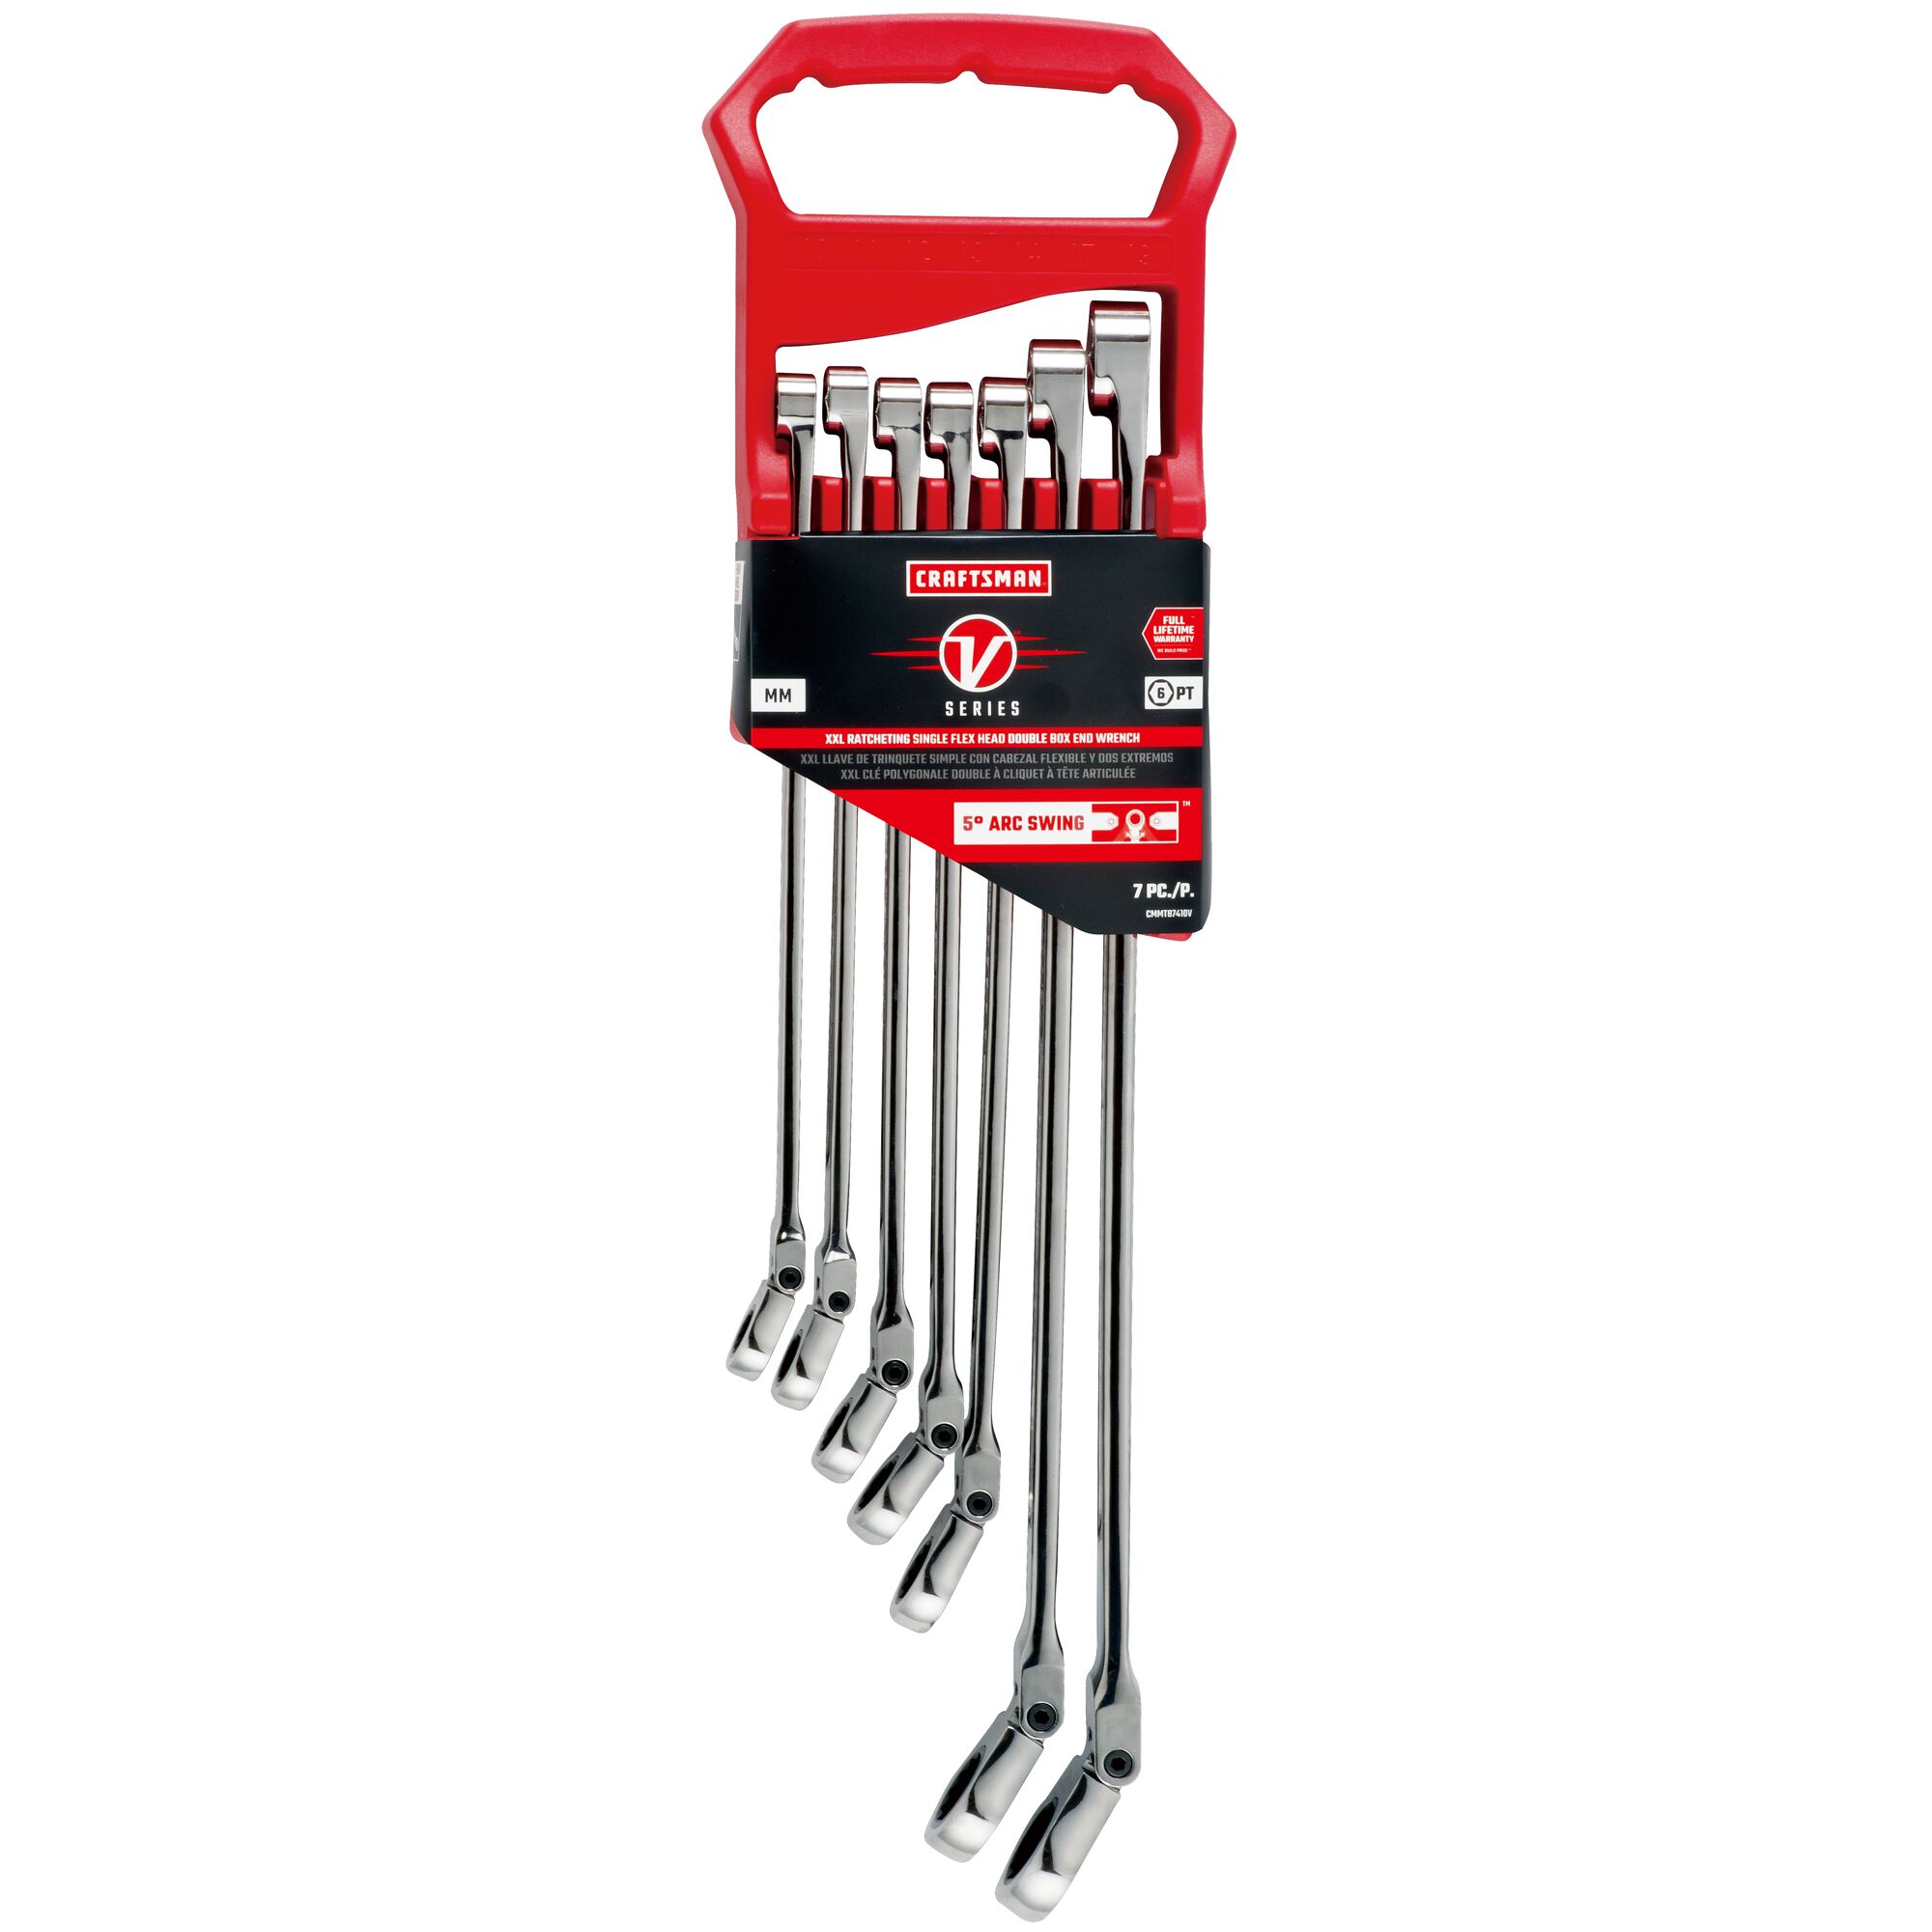 V series XXL metric ratcheting single flex head double box end wrench set (7 piece) in packaging.